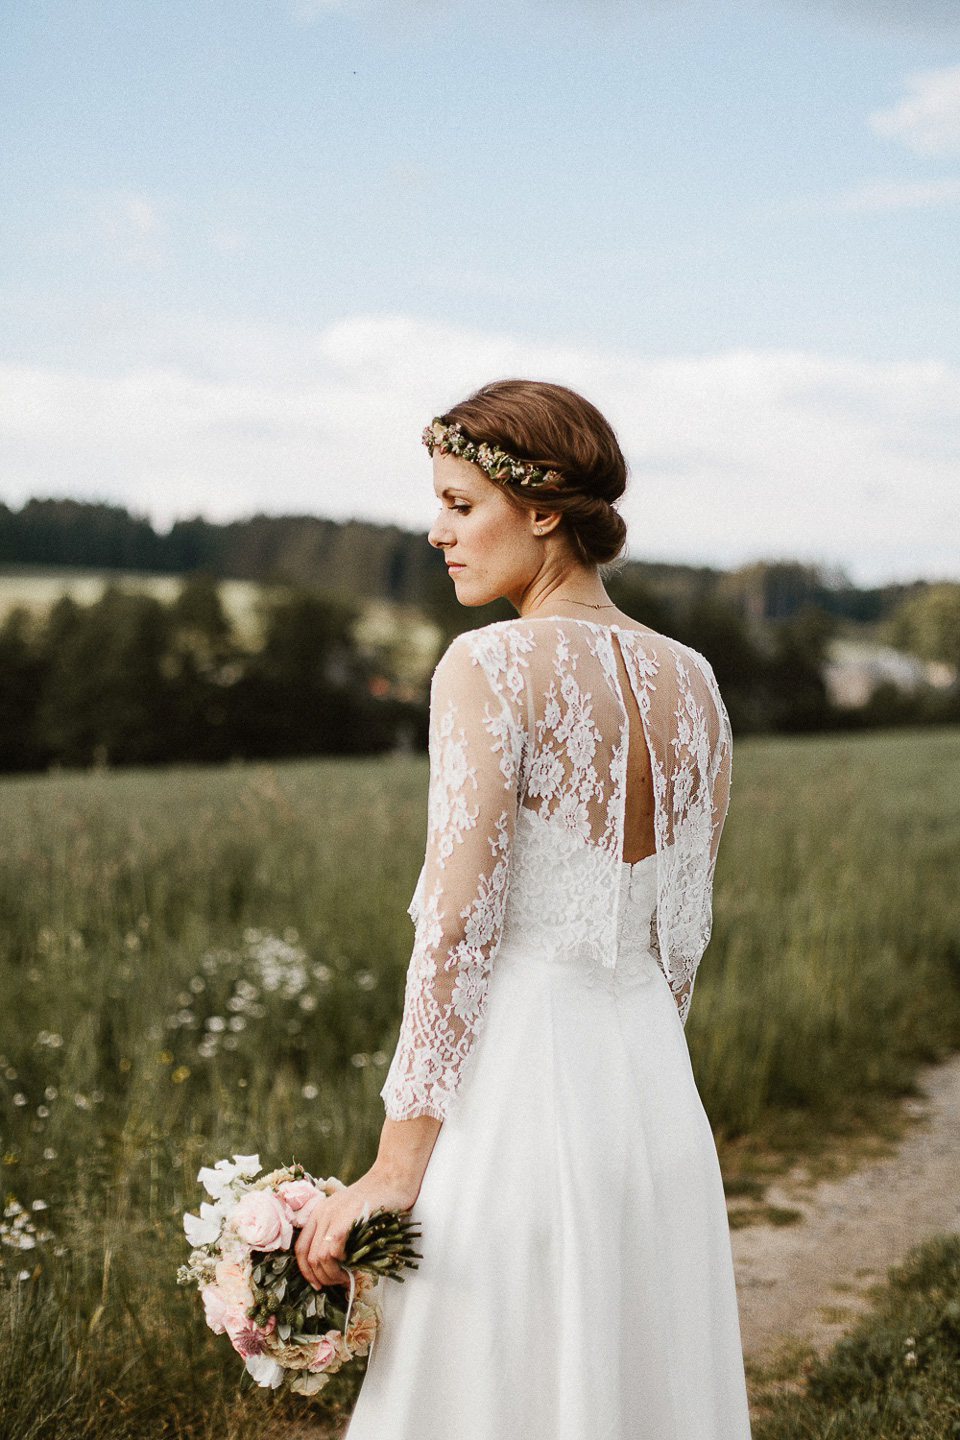 The bride wears Sarah Seven and a Ru de Seine lace blouse for her Boho Rustic Bavarian Farmhouse wedding. Photography by Kevin Klein.